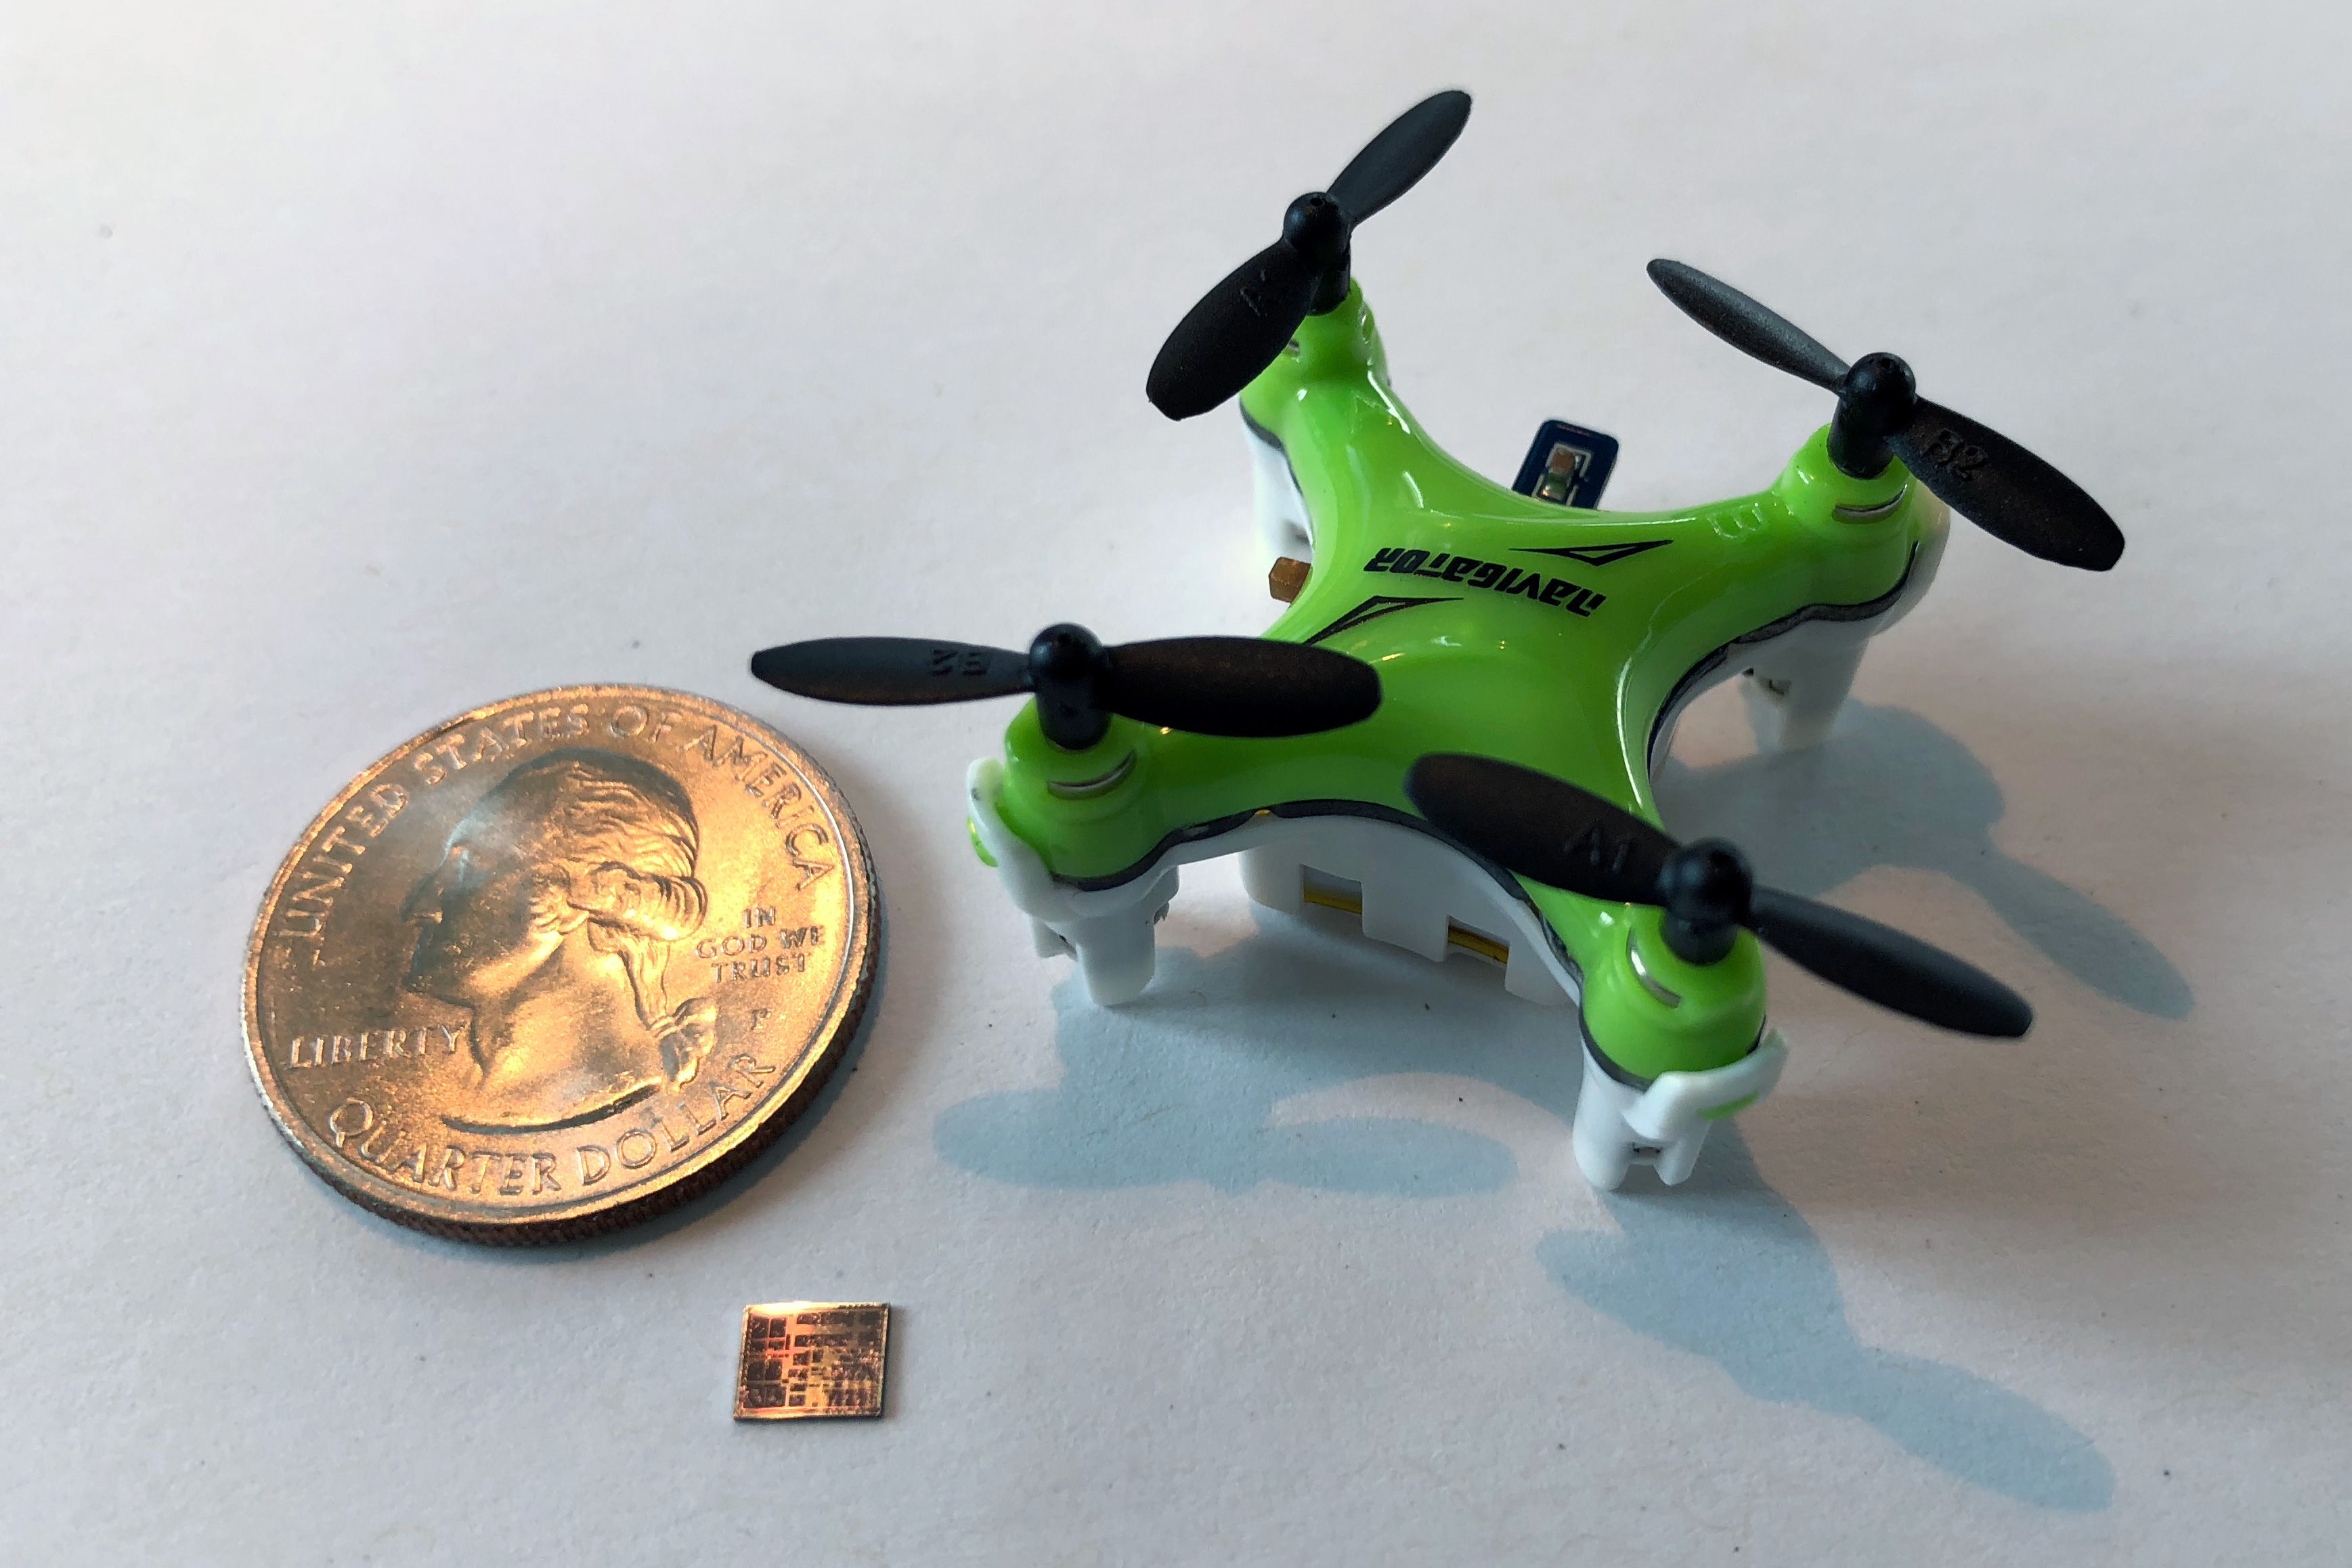 Chip upgrade helps miniature drones navigate | MIT Massachusetts Institute of Technology